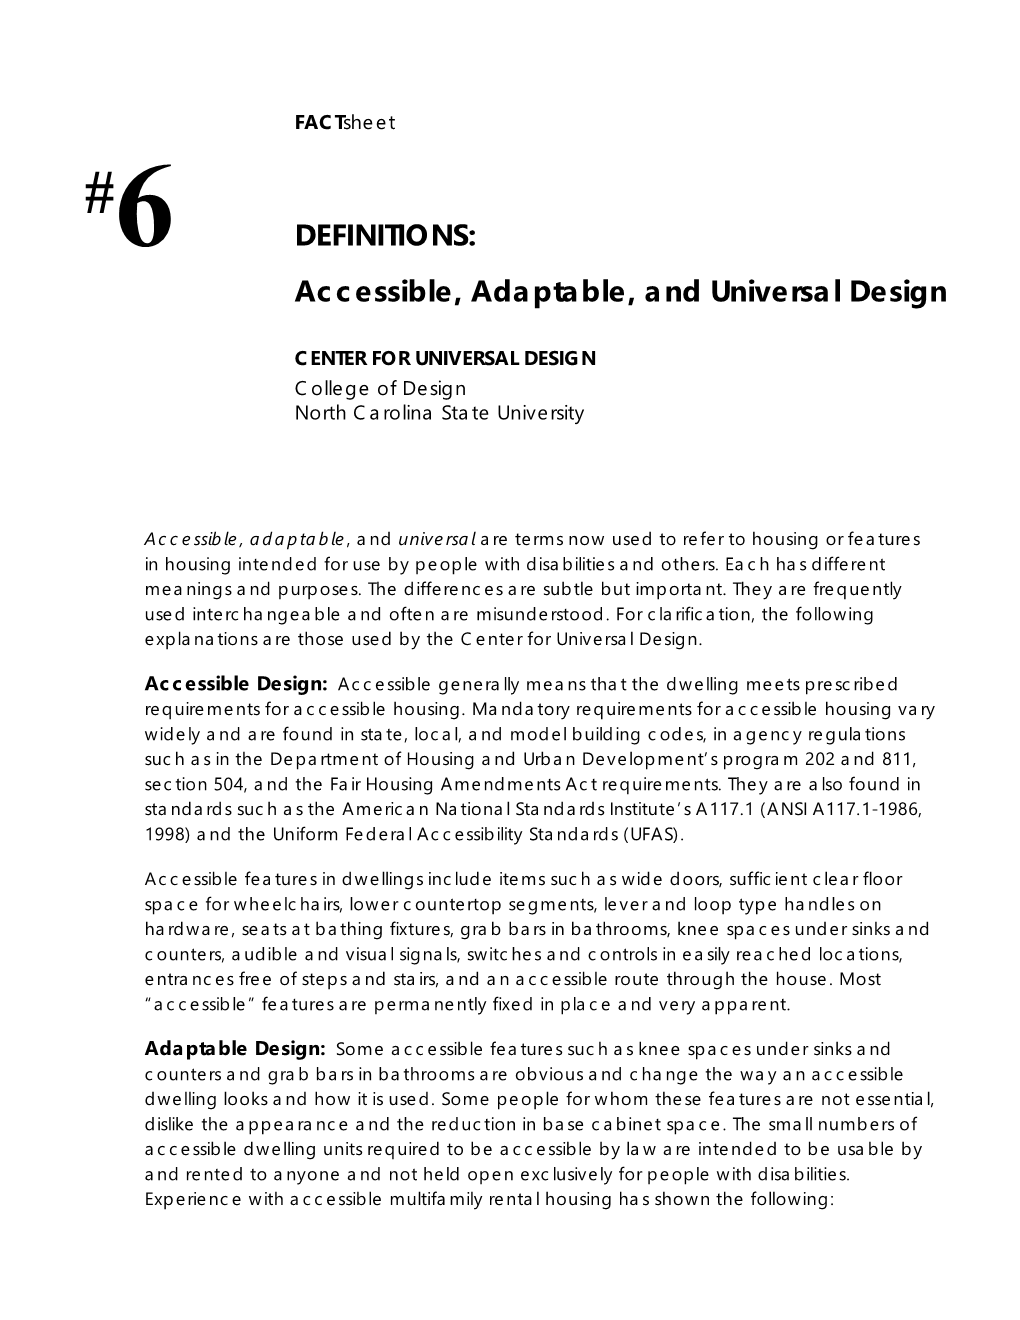 6 DEFINITIONS: Accessible, Adaptable, and Universal Design